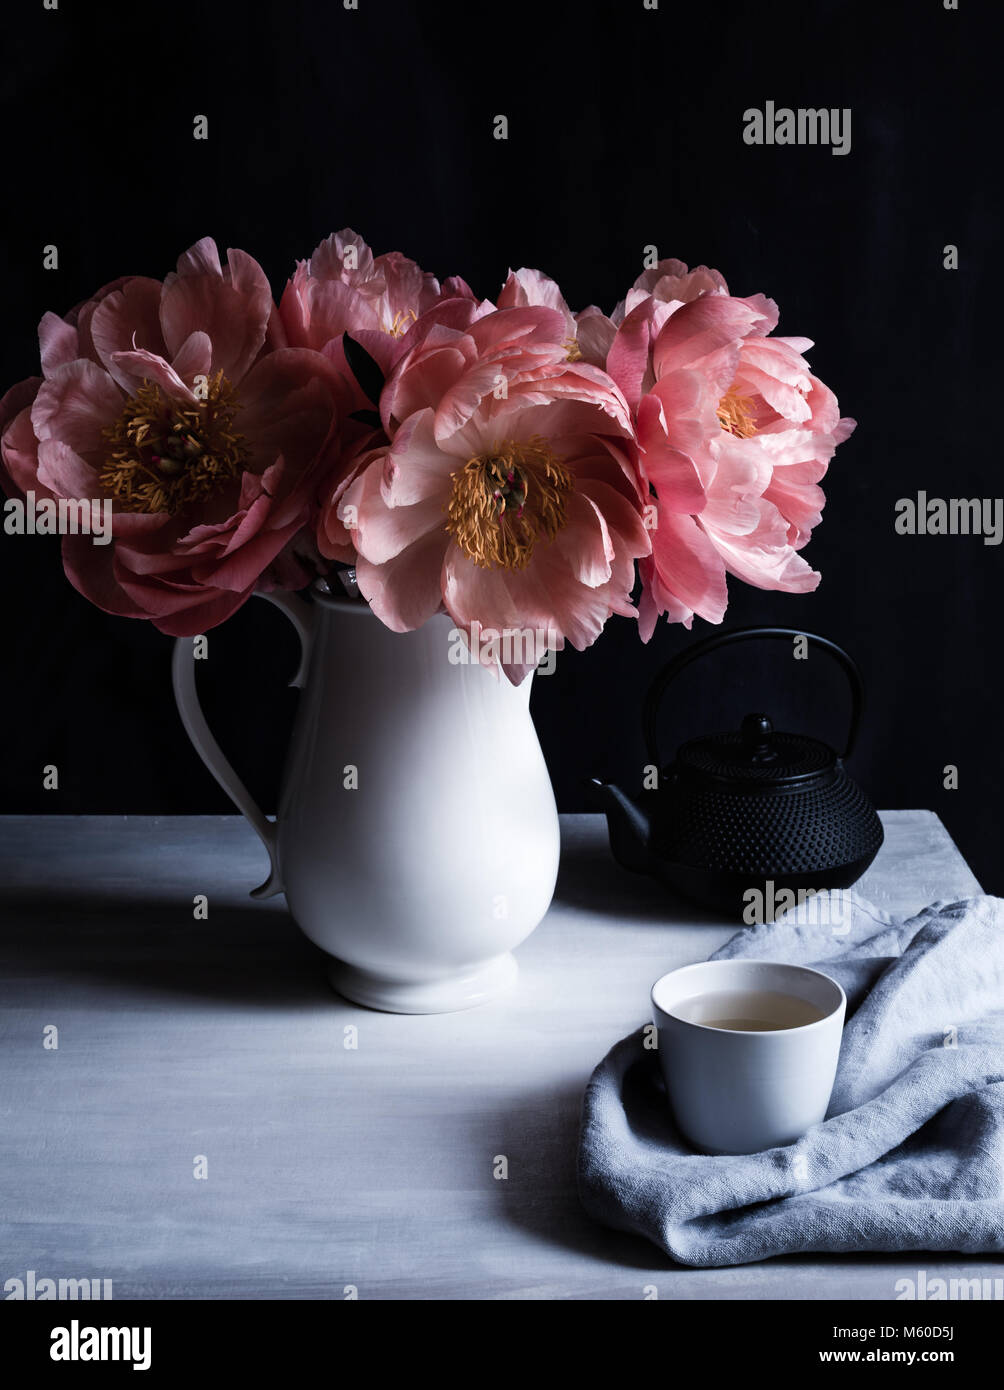 Coral charm peonies in full bloom, in a white jug on table with cup and tetsublin teapot, dark background, shot in natural light Stock Photo